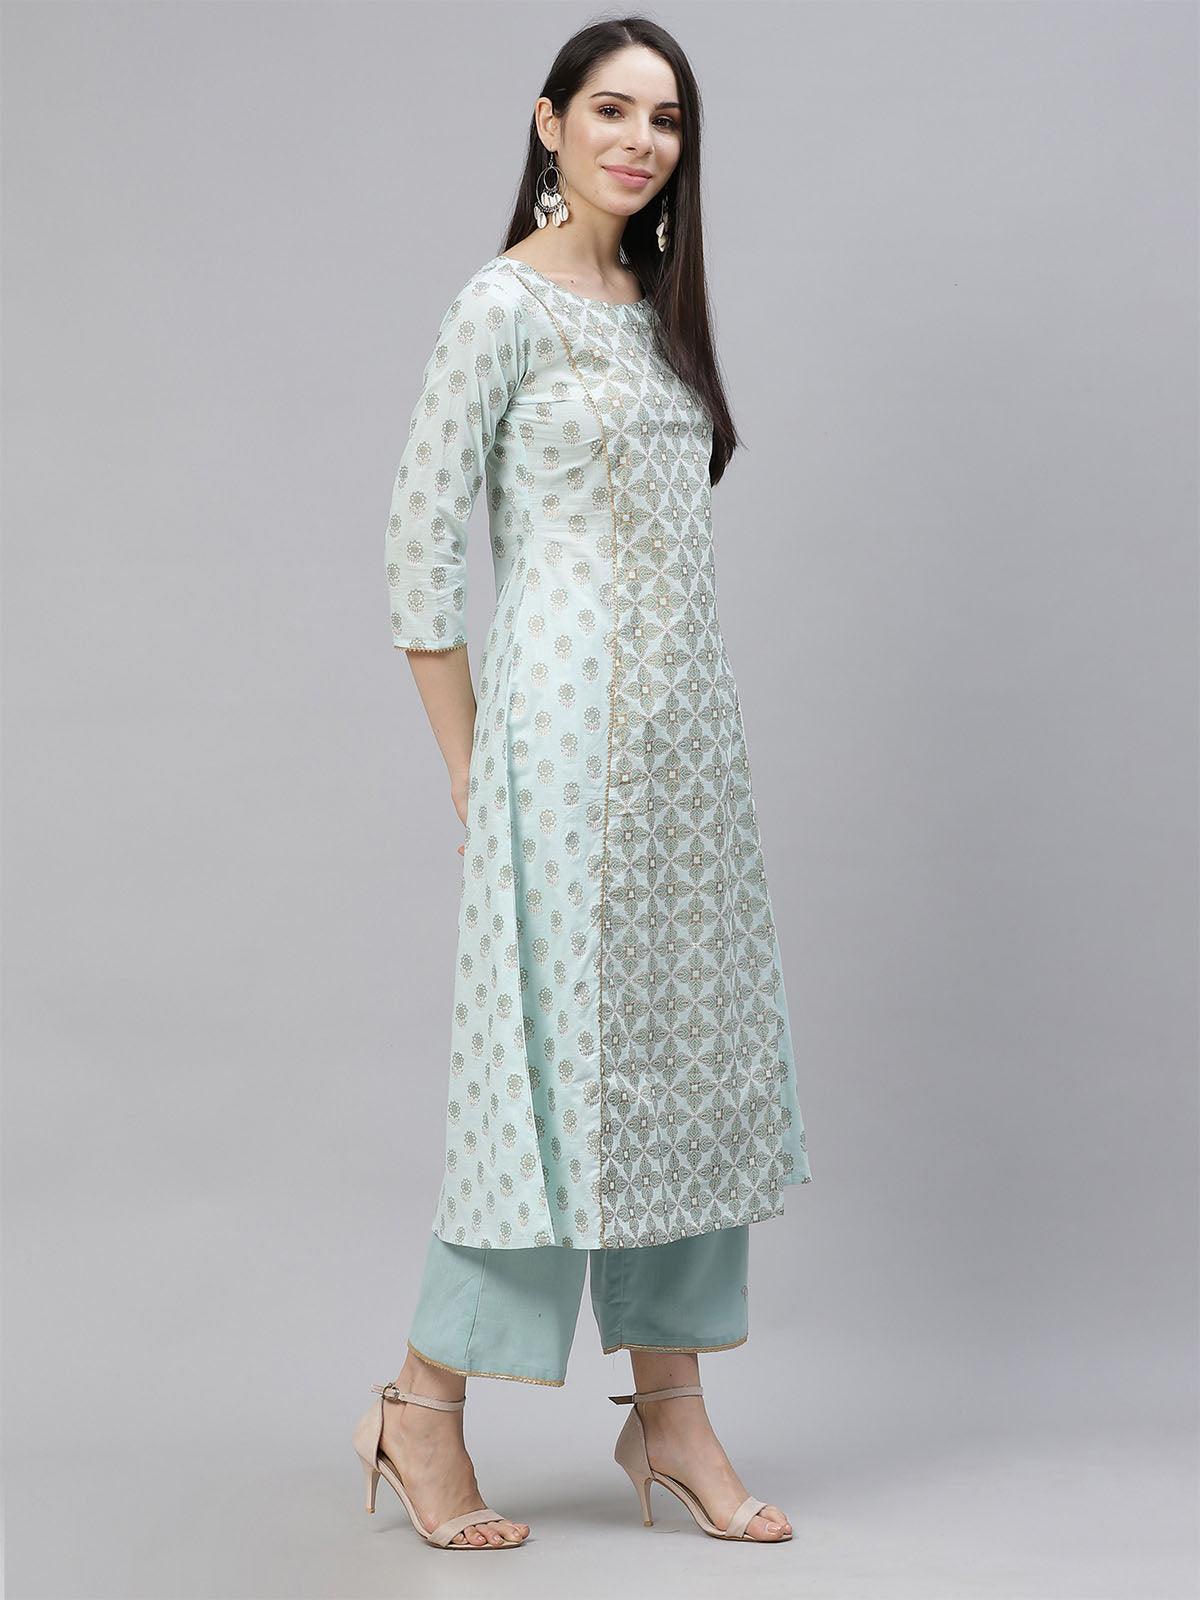 Sea Green A Line Princesses Kali With Trouser And Dupatta Set - Odette